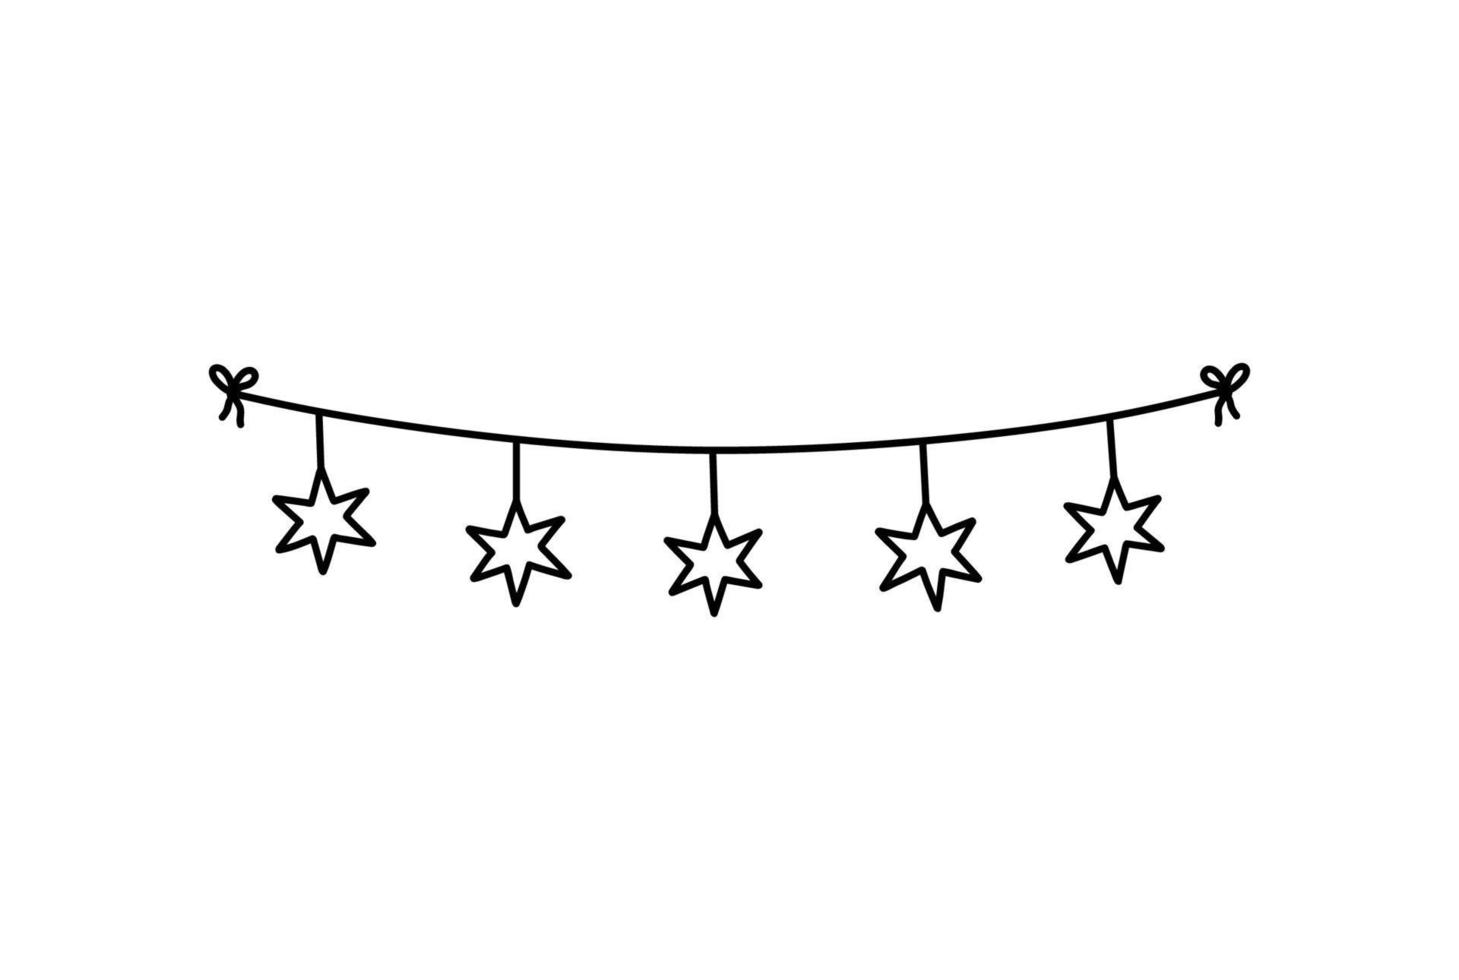 Cute bunting with stars isolated on white background. Festive garland. Vector hand-drawn illustration in doodle style. Perfect for holiday designs, cards, decorations, logo.